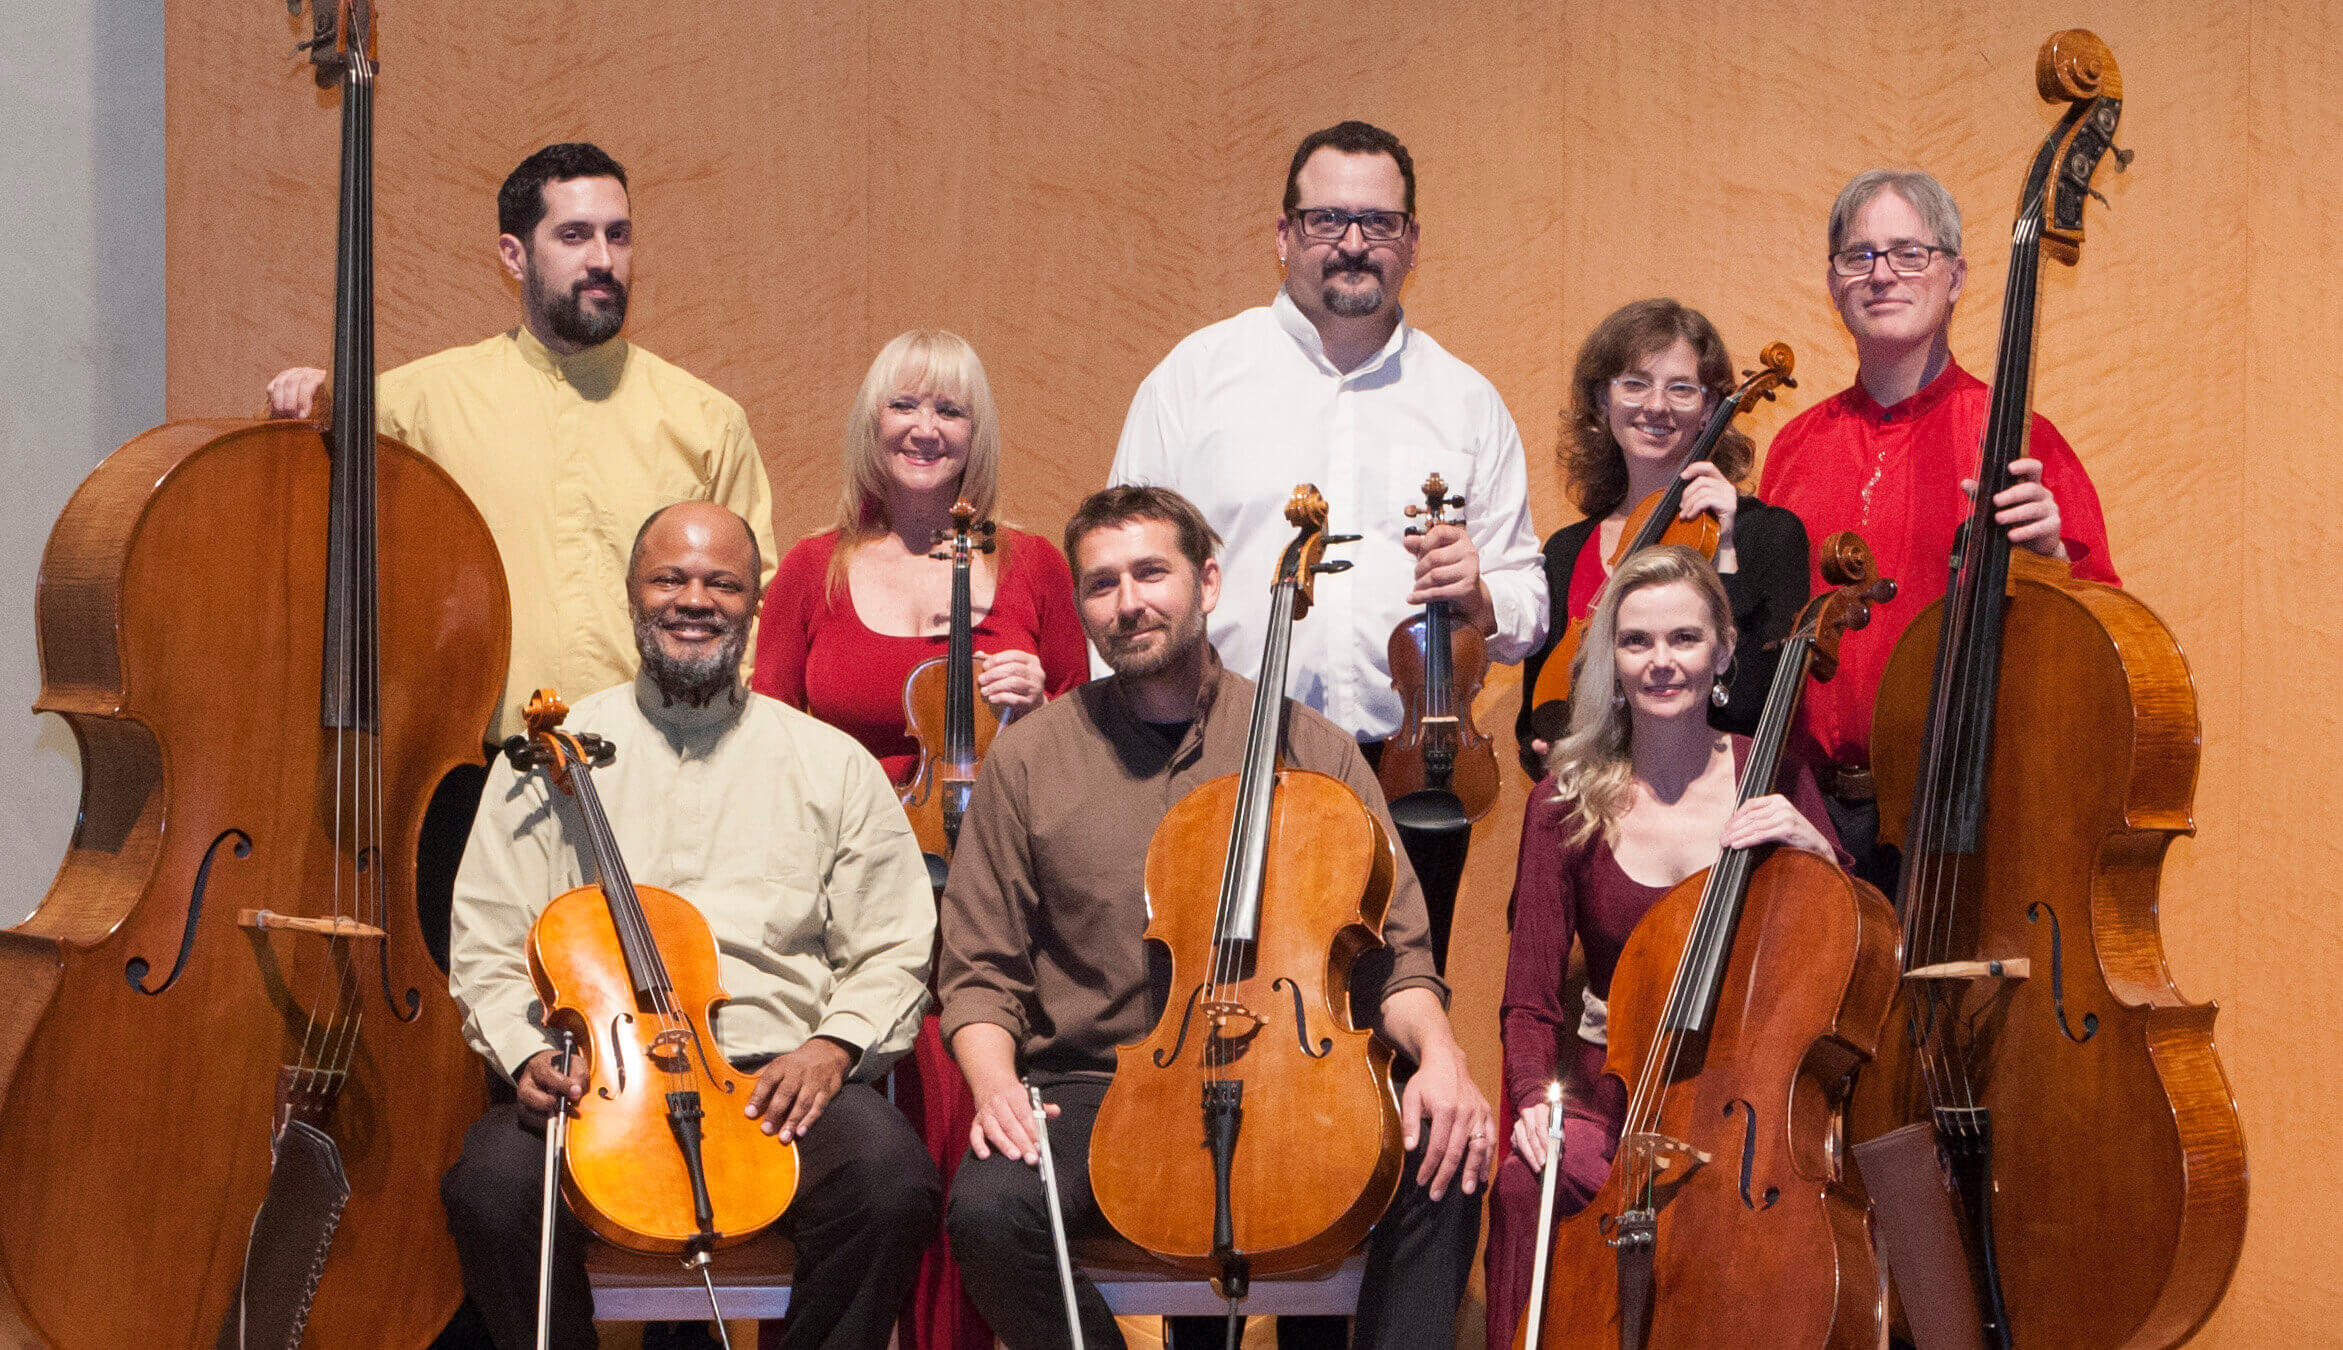 Selected members of the Hutchins Consort from left to right: Ruslan Biryukov, A.J. Fanning, Bethany Grace, Pete Jacobson, Steve Huber, Batya MacAdam-Somer, Sarah O'Brien and Joe McNalley. MacAdam-Somer and O'Brien did not play at "Yidl mit akht fidlen." Not pictured: Linda Piatt and Tim McNalley played at the concert.